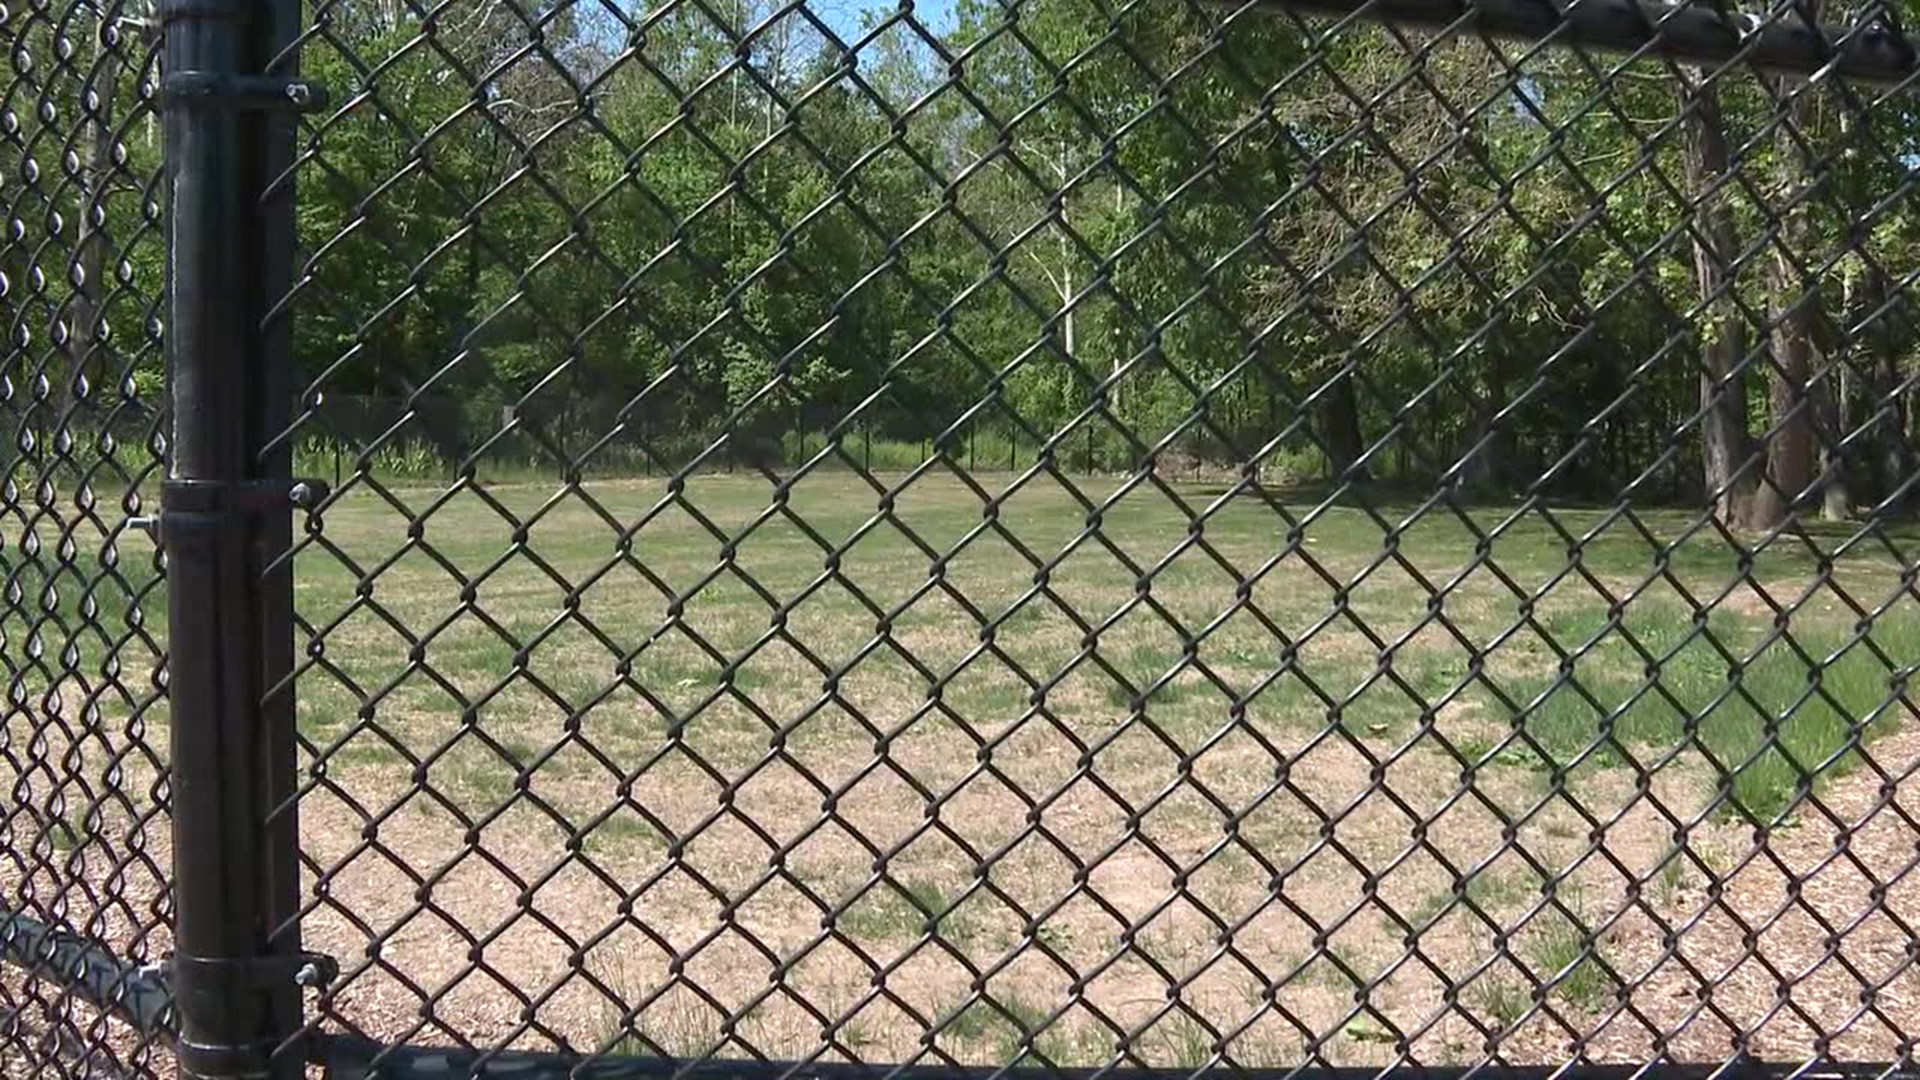 Pocono Township's new dog park will require registration and a fee for users.